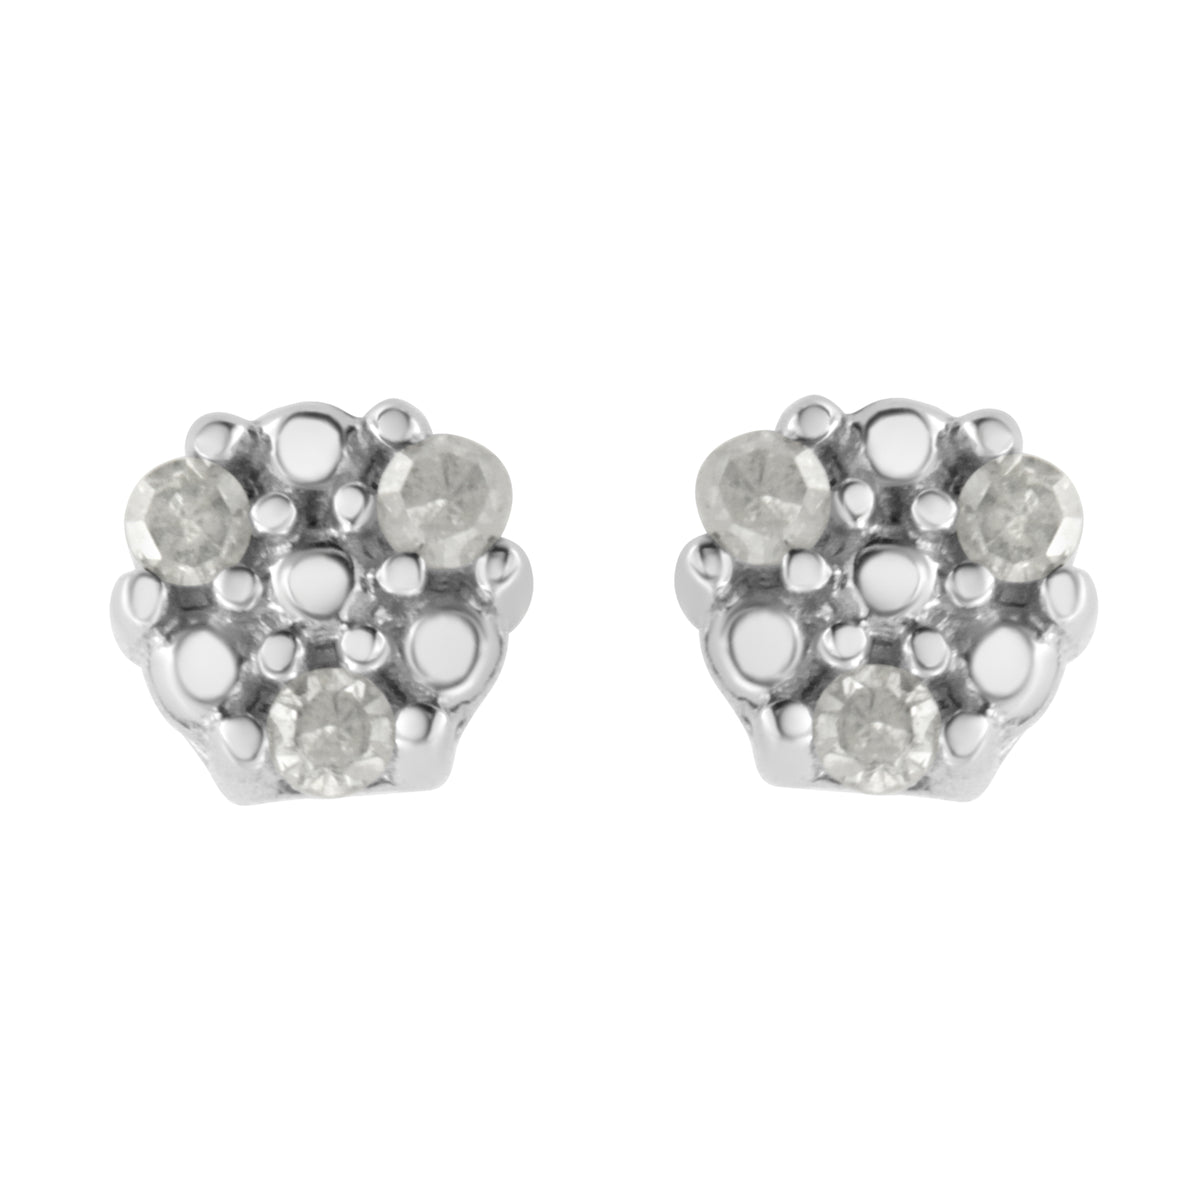 .925 Sterling Silver 1/10 cttw Prong Set Round-Cut Trio Diamond Stud Earrings (I-J Color, I3 Clarity)-One Size-1